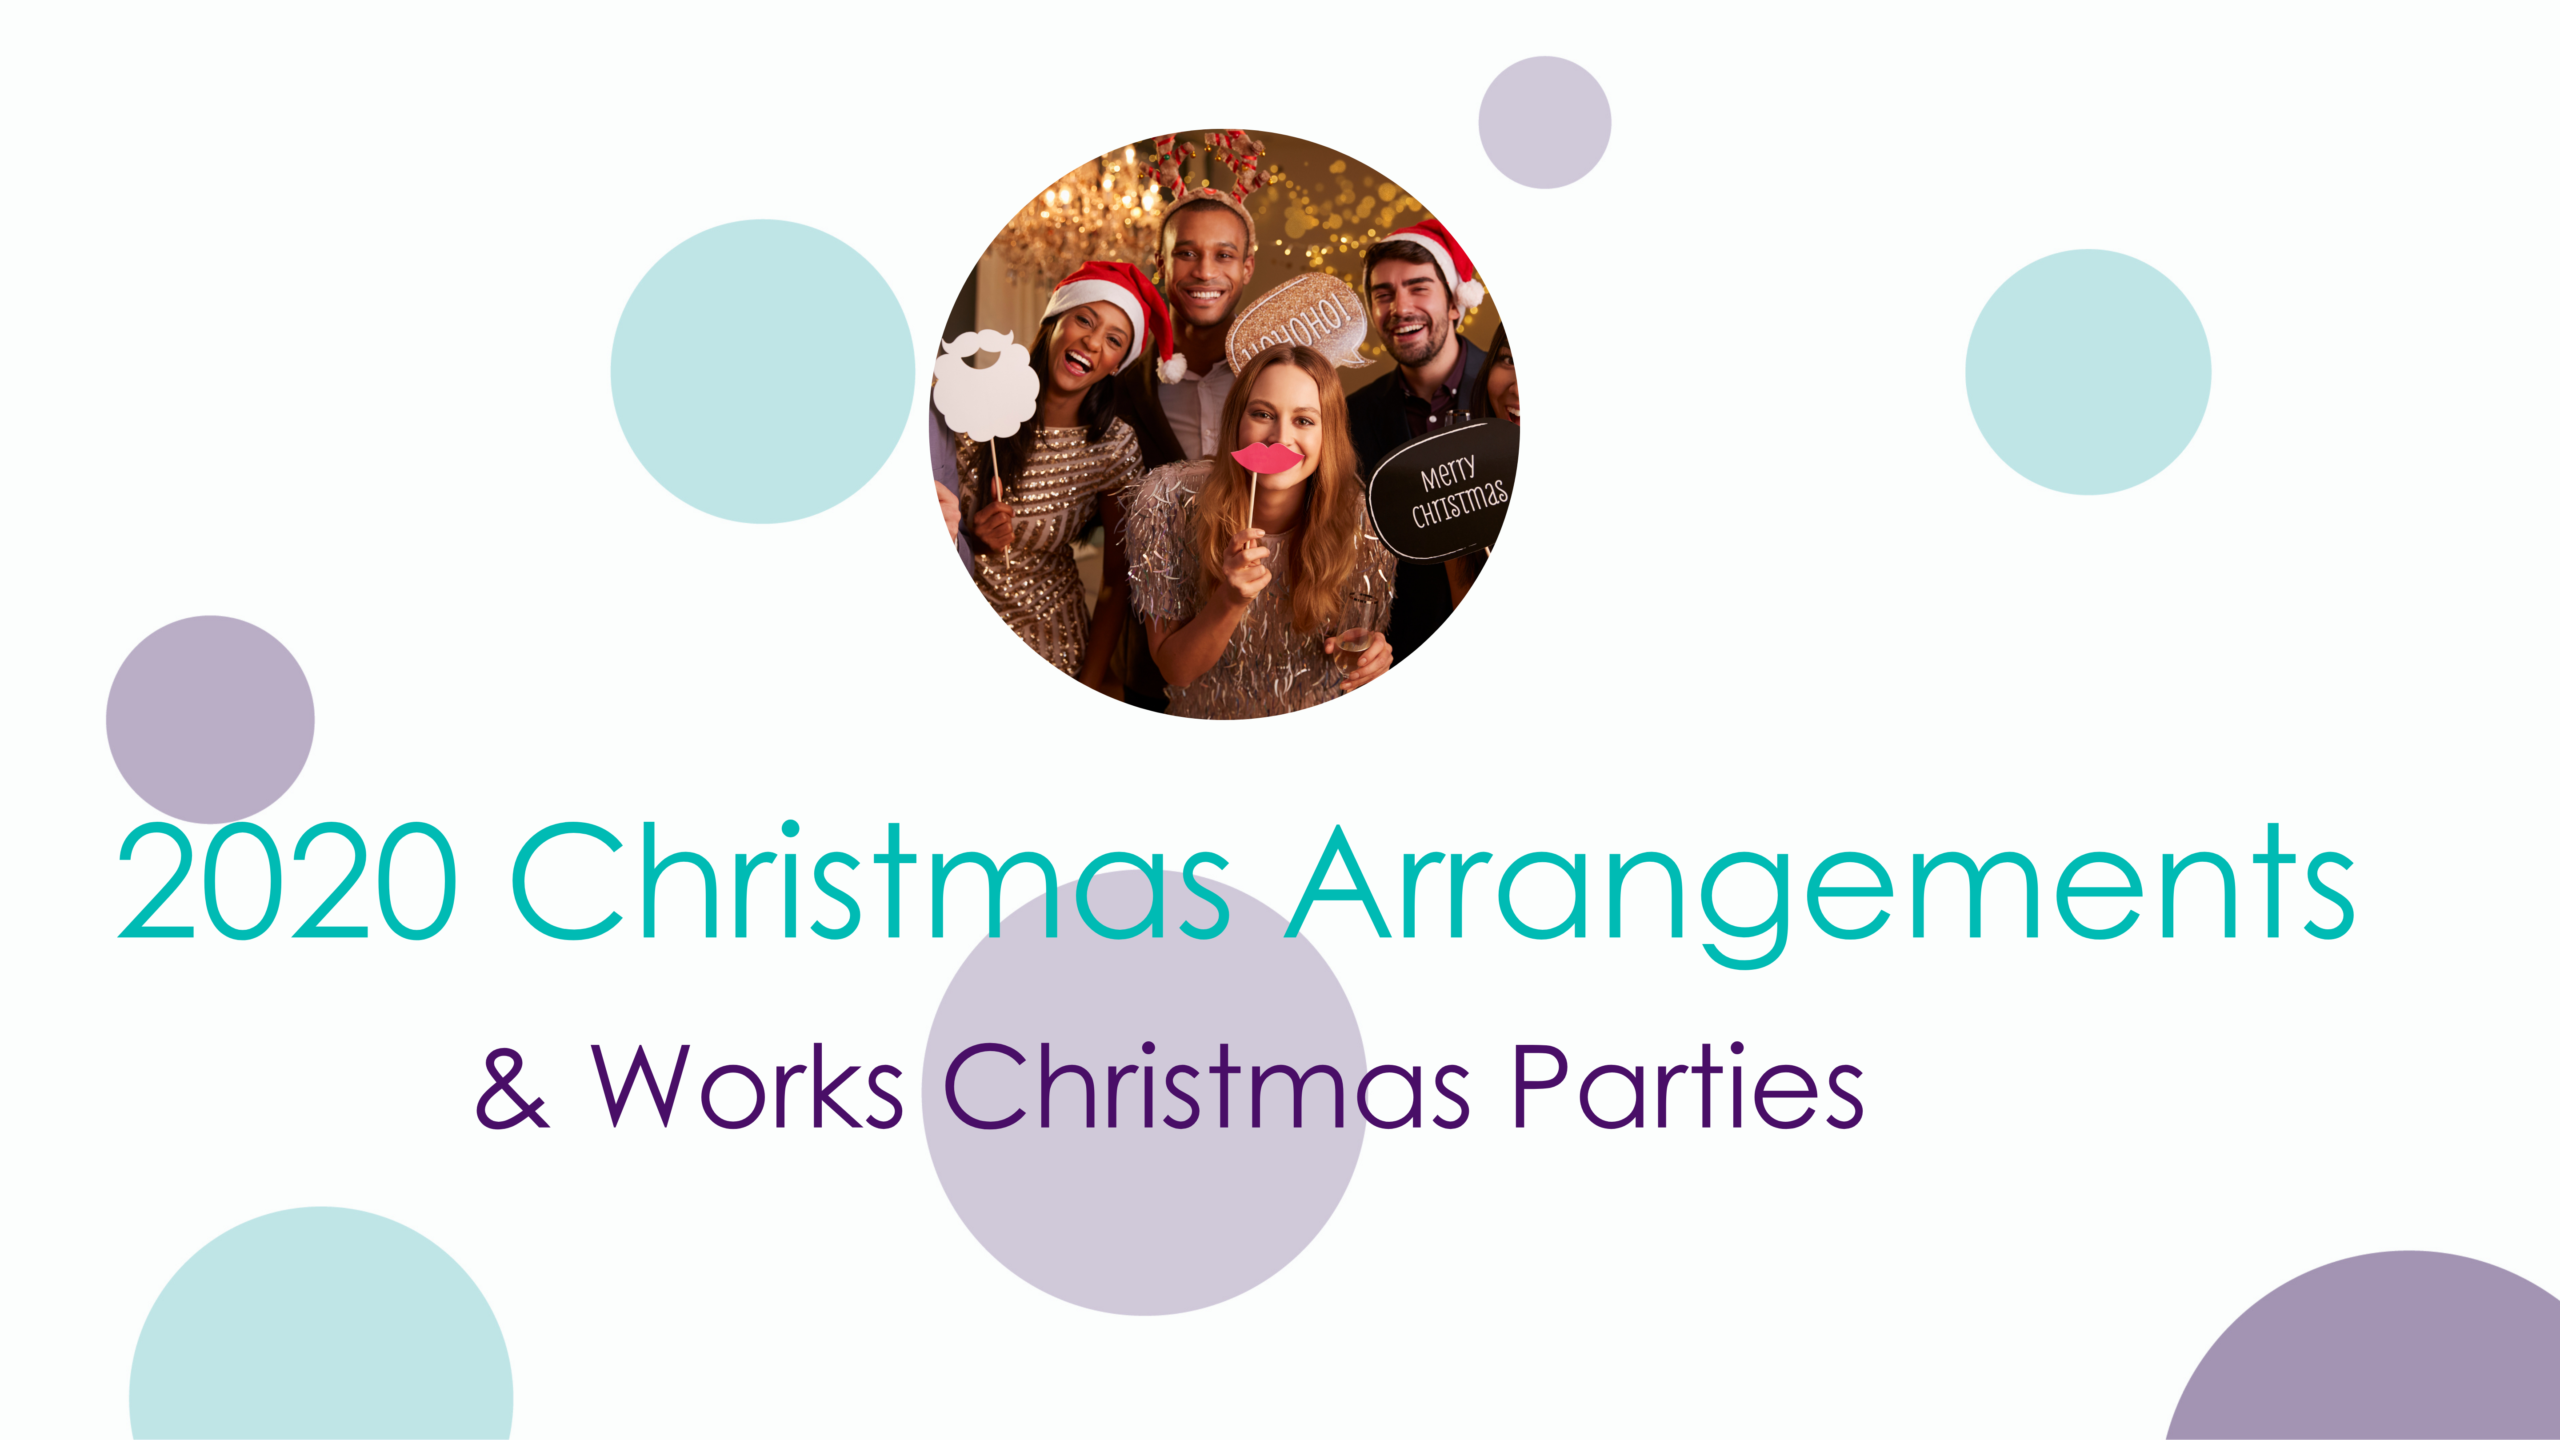 2020 Christmas arrangements and works Christmas parties